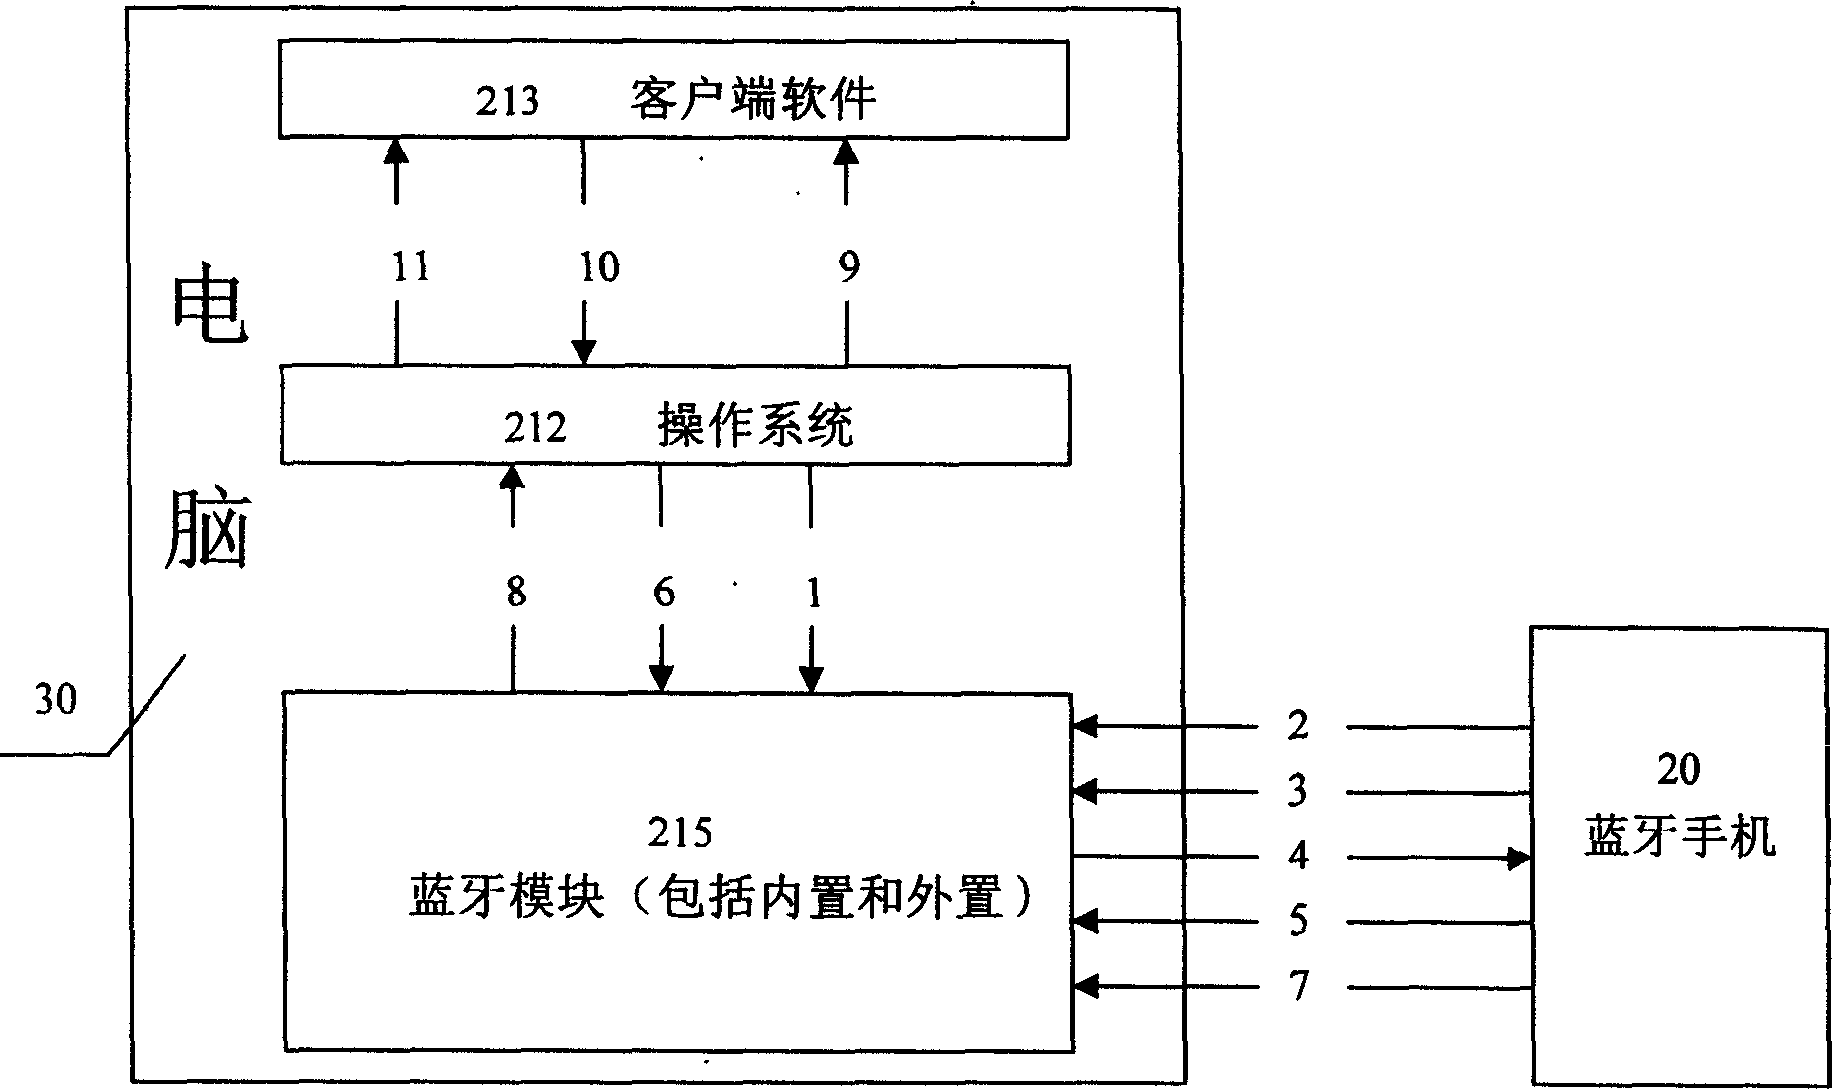 Control system and operating steps for Blue Tooth mobile phone remote-control computer